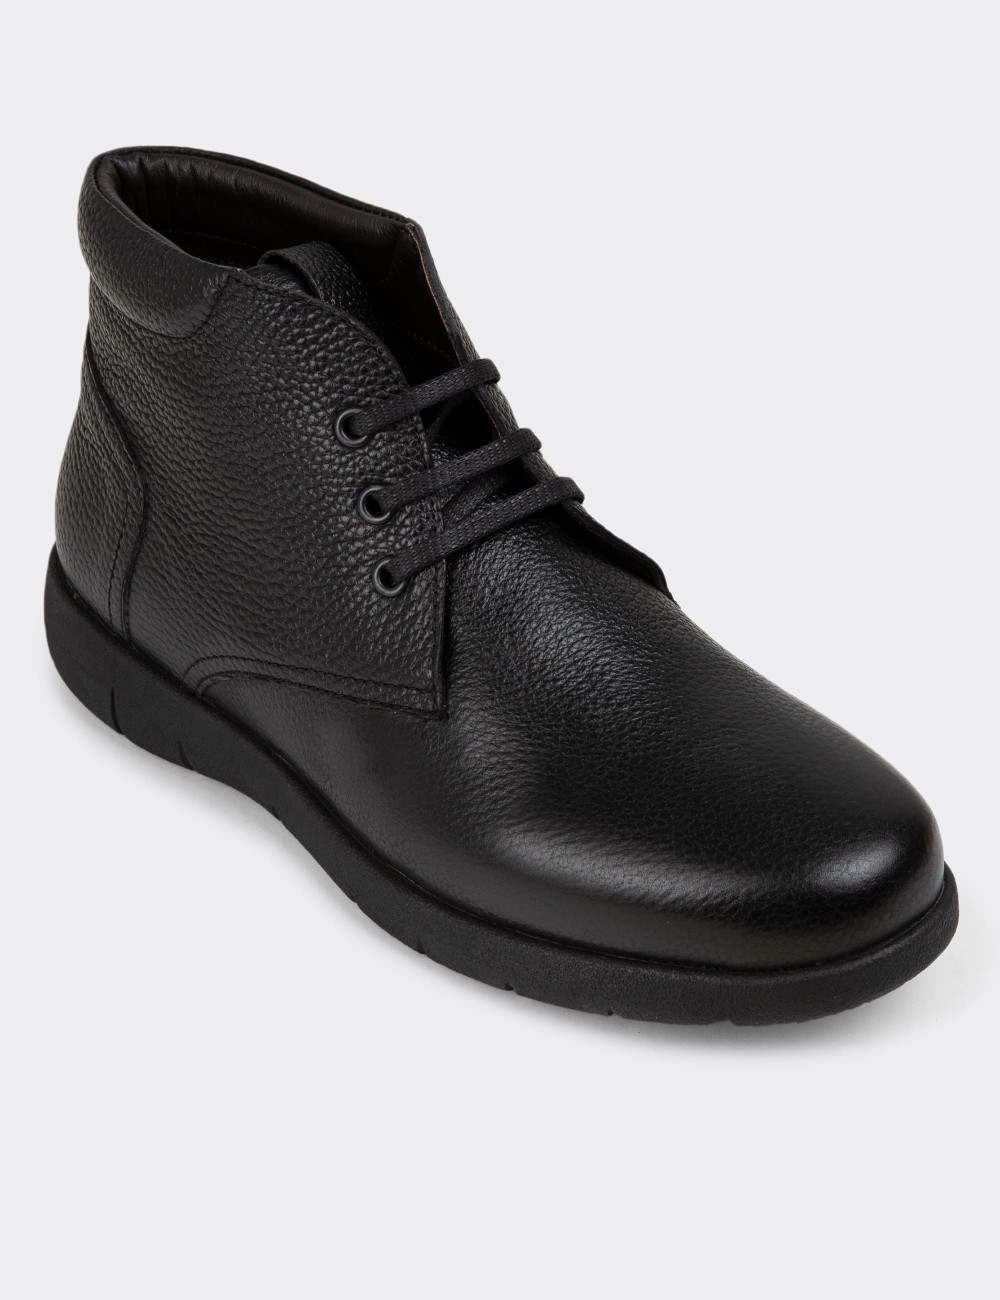 Black Leather Boots - 01948MSYHC01